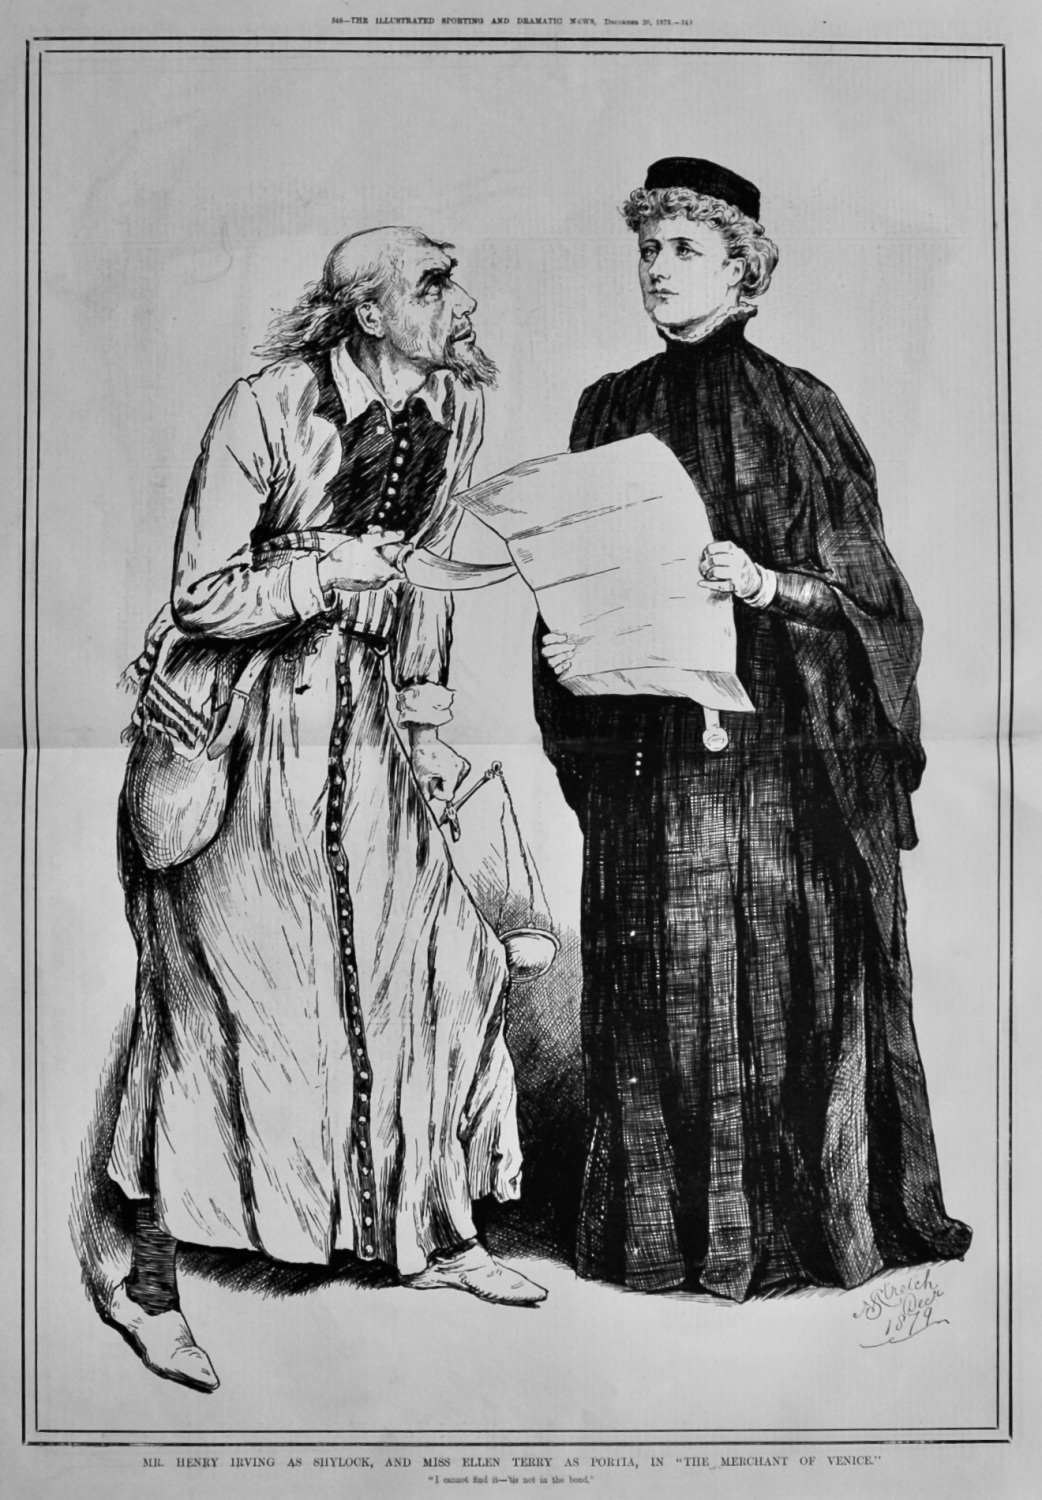 Mr. Henry Irving as Shylock, and Miss Ellen Terry as Portia, in 